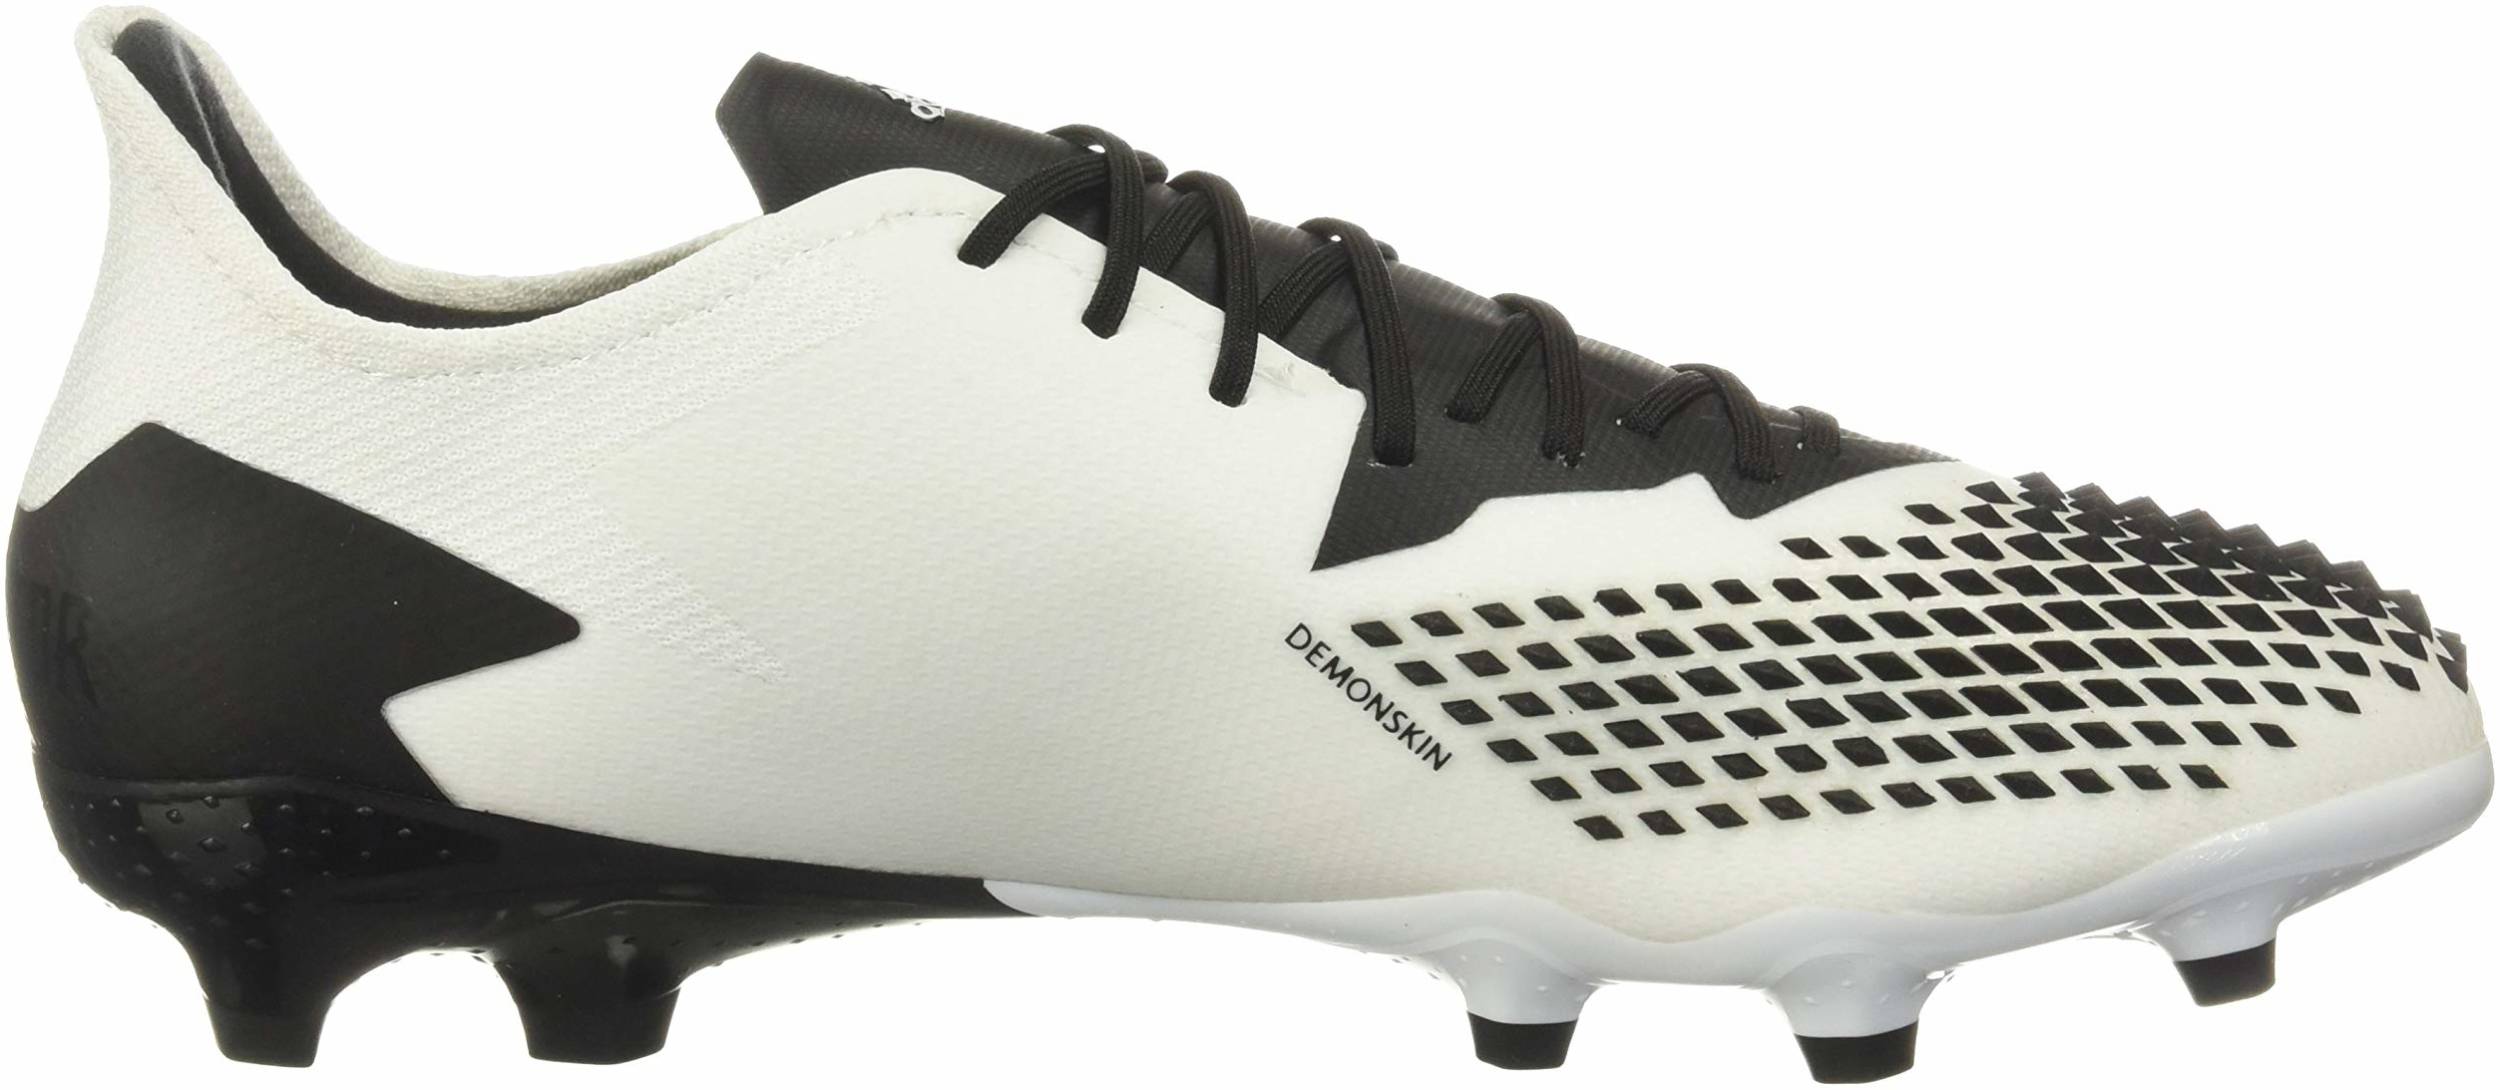 White soccer cleats | Save 62% | 74 